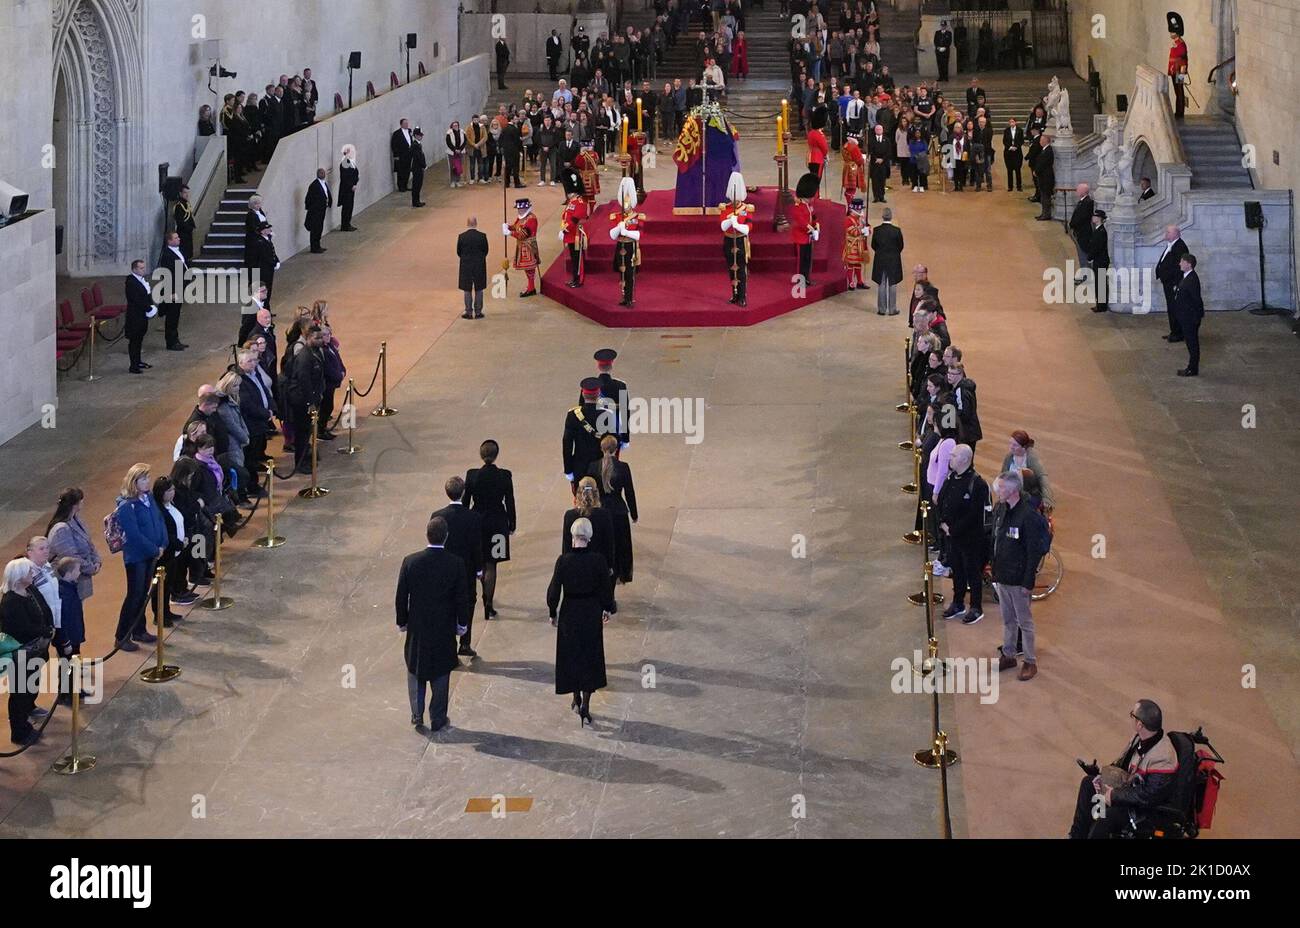 Queen Elizabeth II 's grandchildren (from top, left to right) the Prince of Wales, the Duke of Sussex, Princess Eugenie and Princess Beatrice, James, Viscount Severn and Lady Louise Windsor, Peter Phillips and Zara Tindall arrive for a vigil beside the coffin of their grandmother as it lies in state on the catafalque in Westminster Hall, at the Palace of Westminster, London. Picture date: Saturday September 17, 2022. Stock Photo